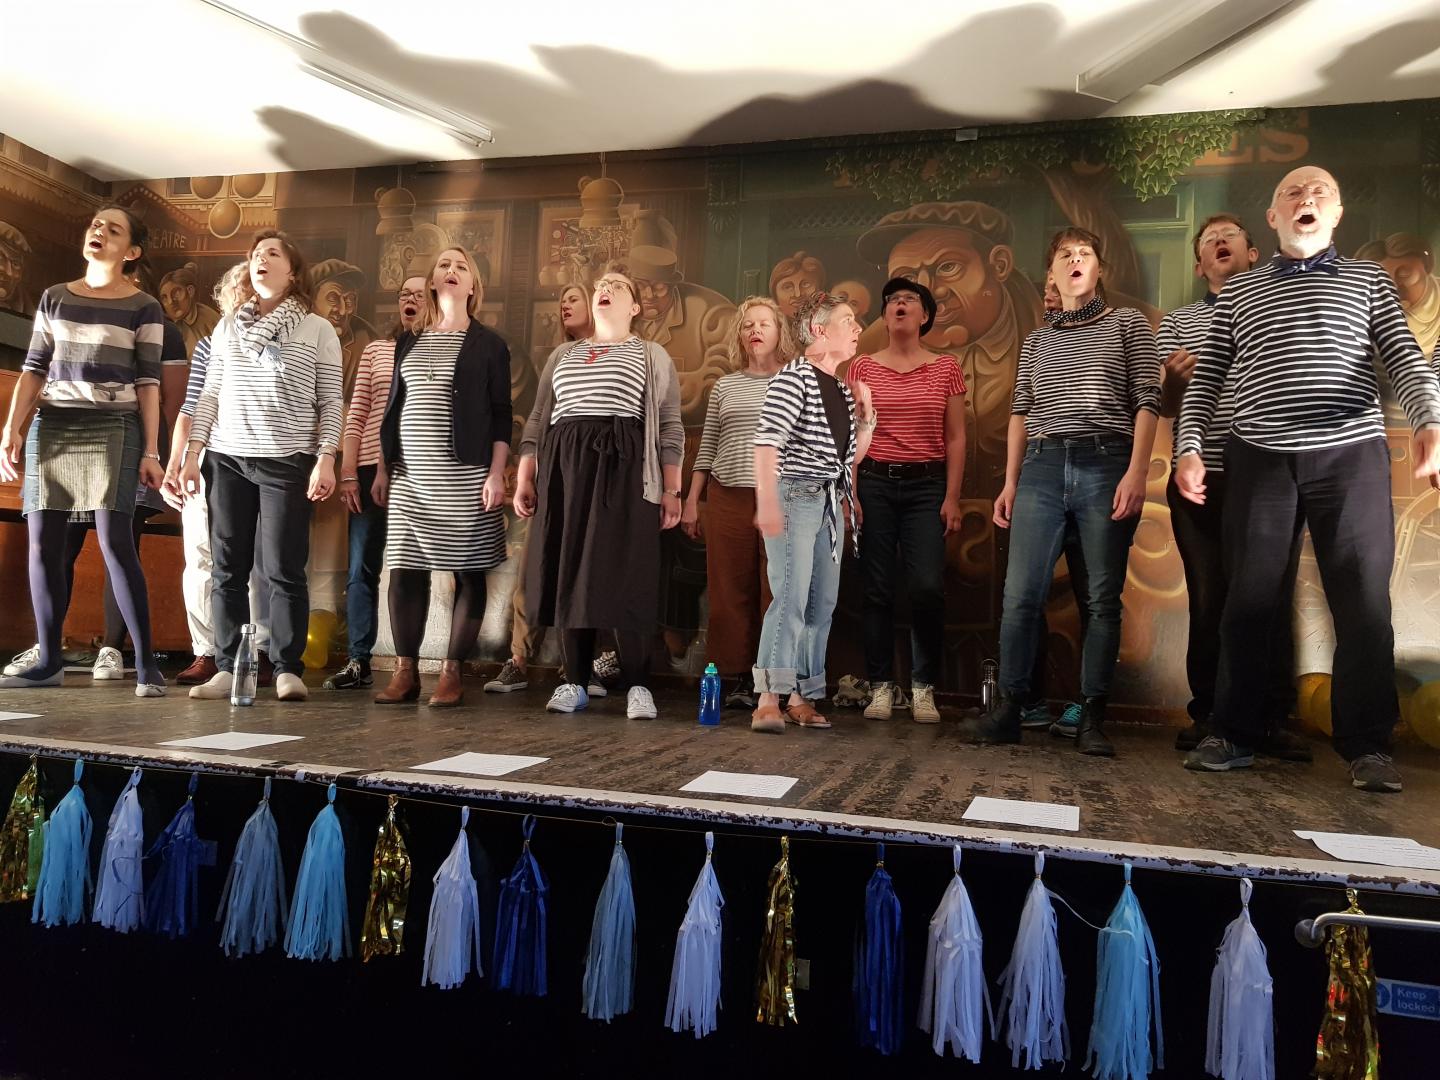 A group shot of the London Sea Shanty Collective